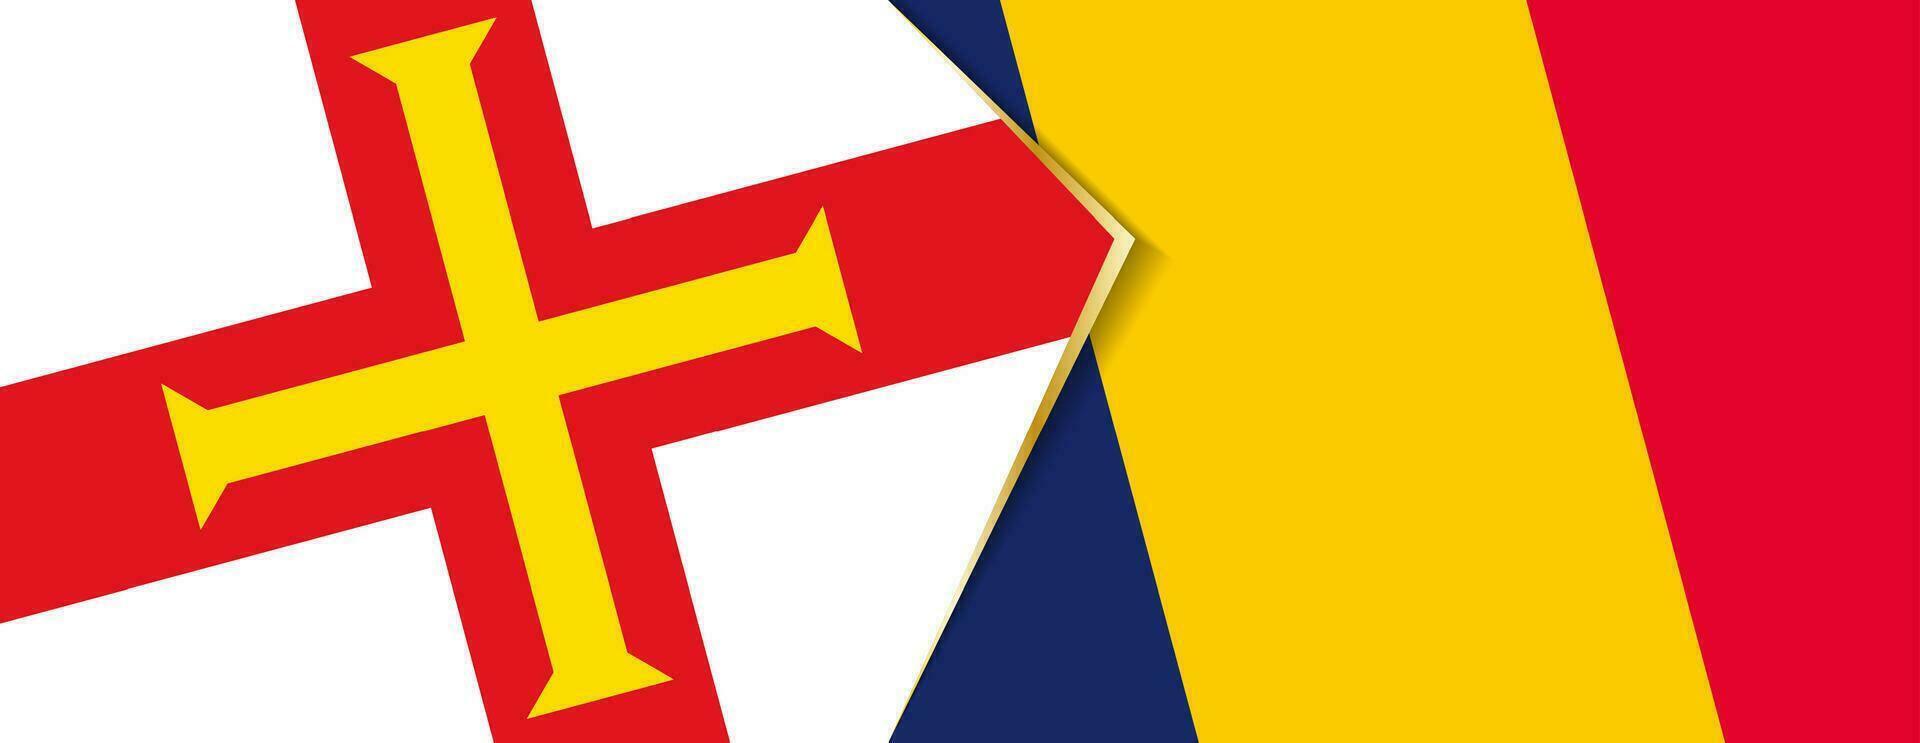 Guernsey and Chad flags, two vector flags.